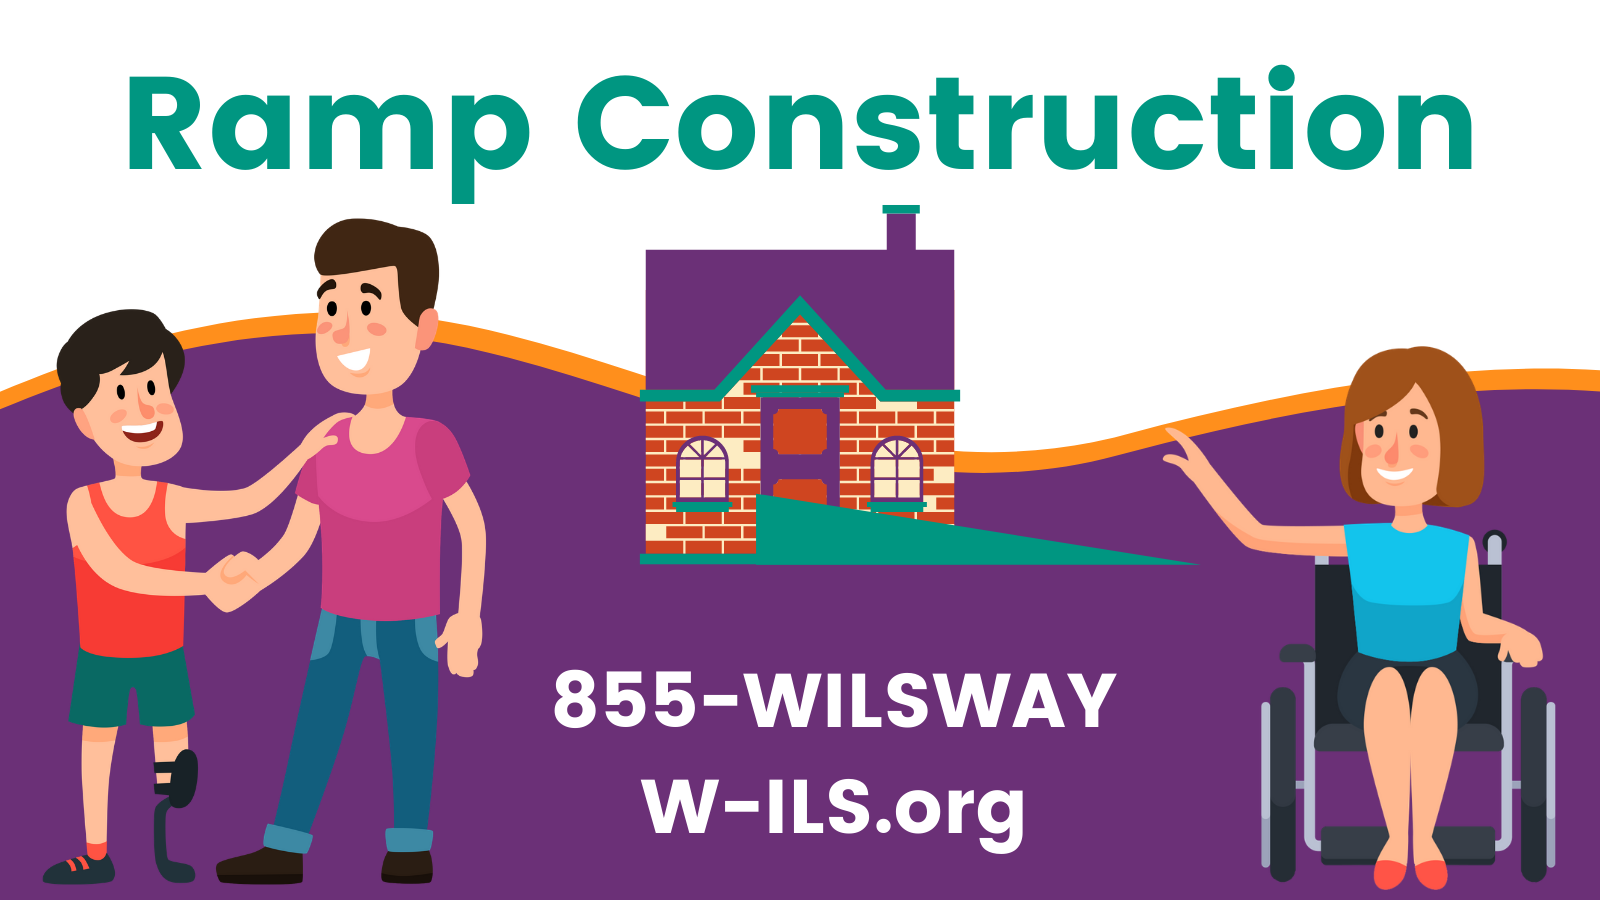 For Ramp Construction, call WILS at 855-WILSWAY or visit W-ILS.org